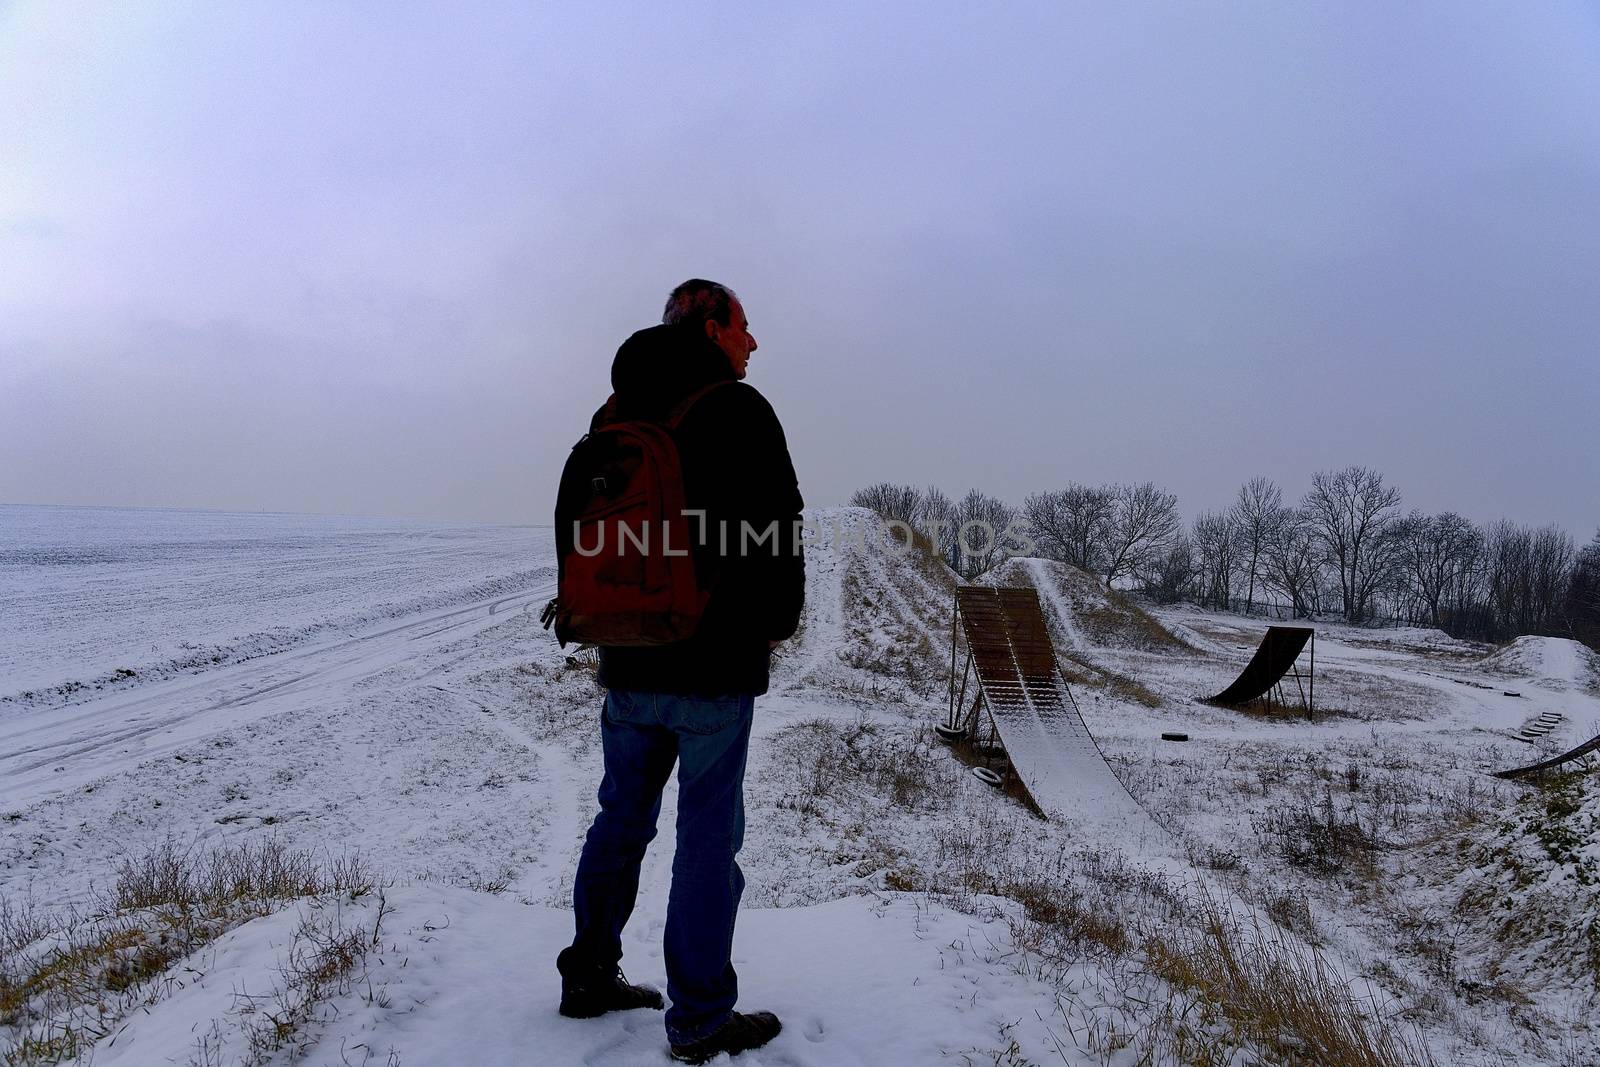 Man viewing on abandoned freestyle motocross ramps. Middle age man standing in winter landscape during sunsrise.